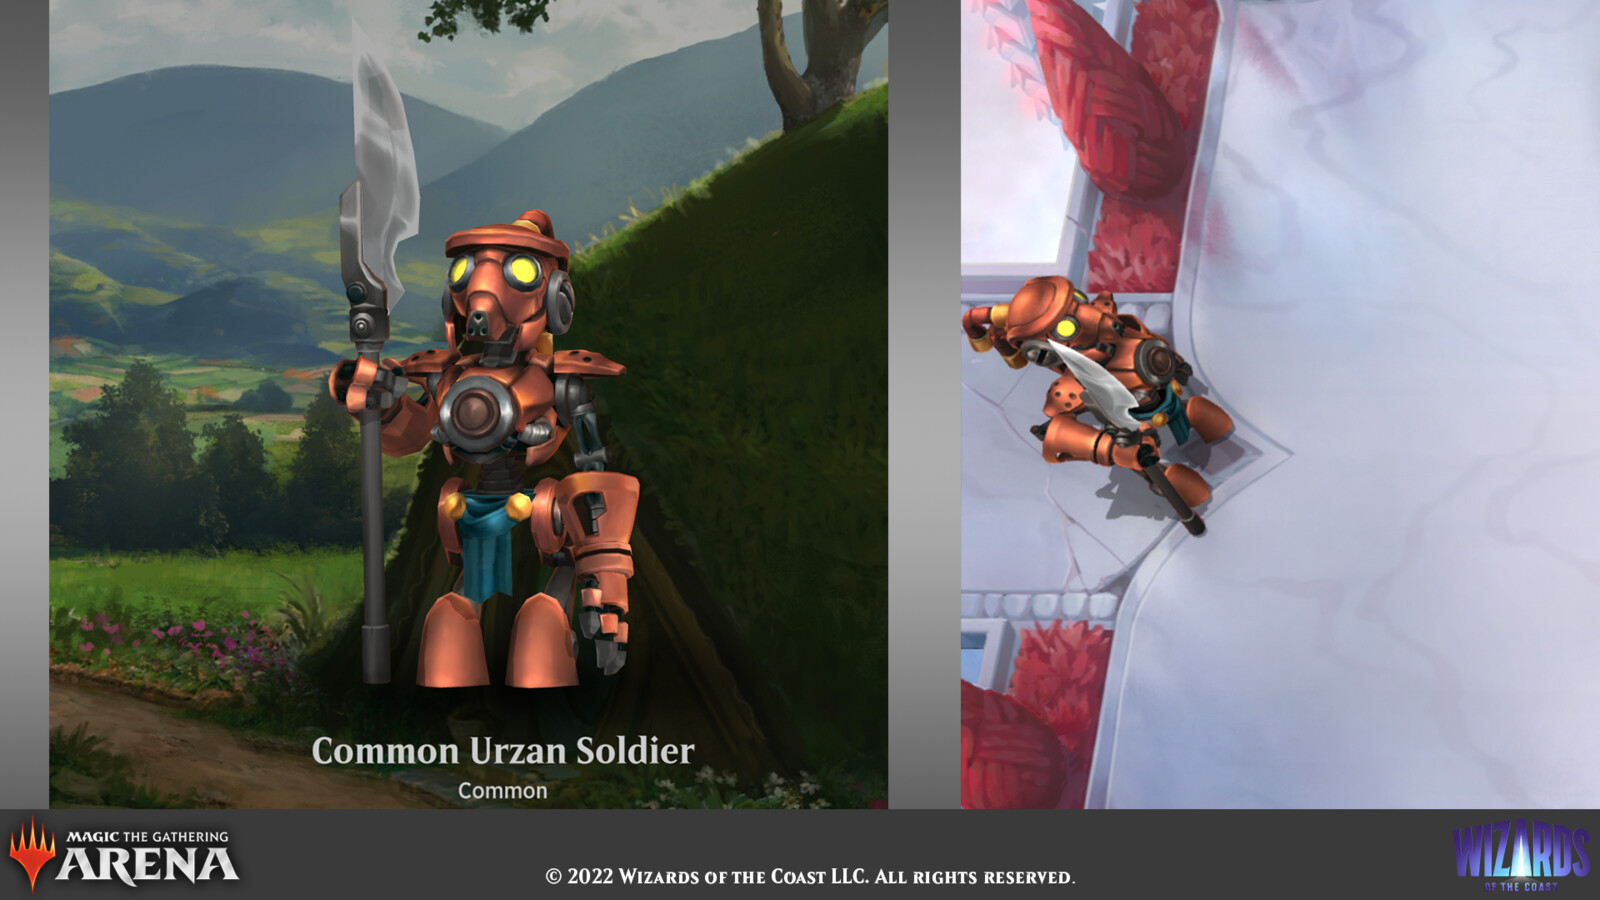 Select pet and game views for the Common Urzan Solider